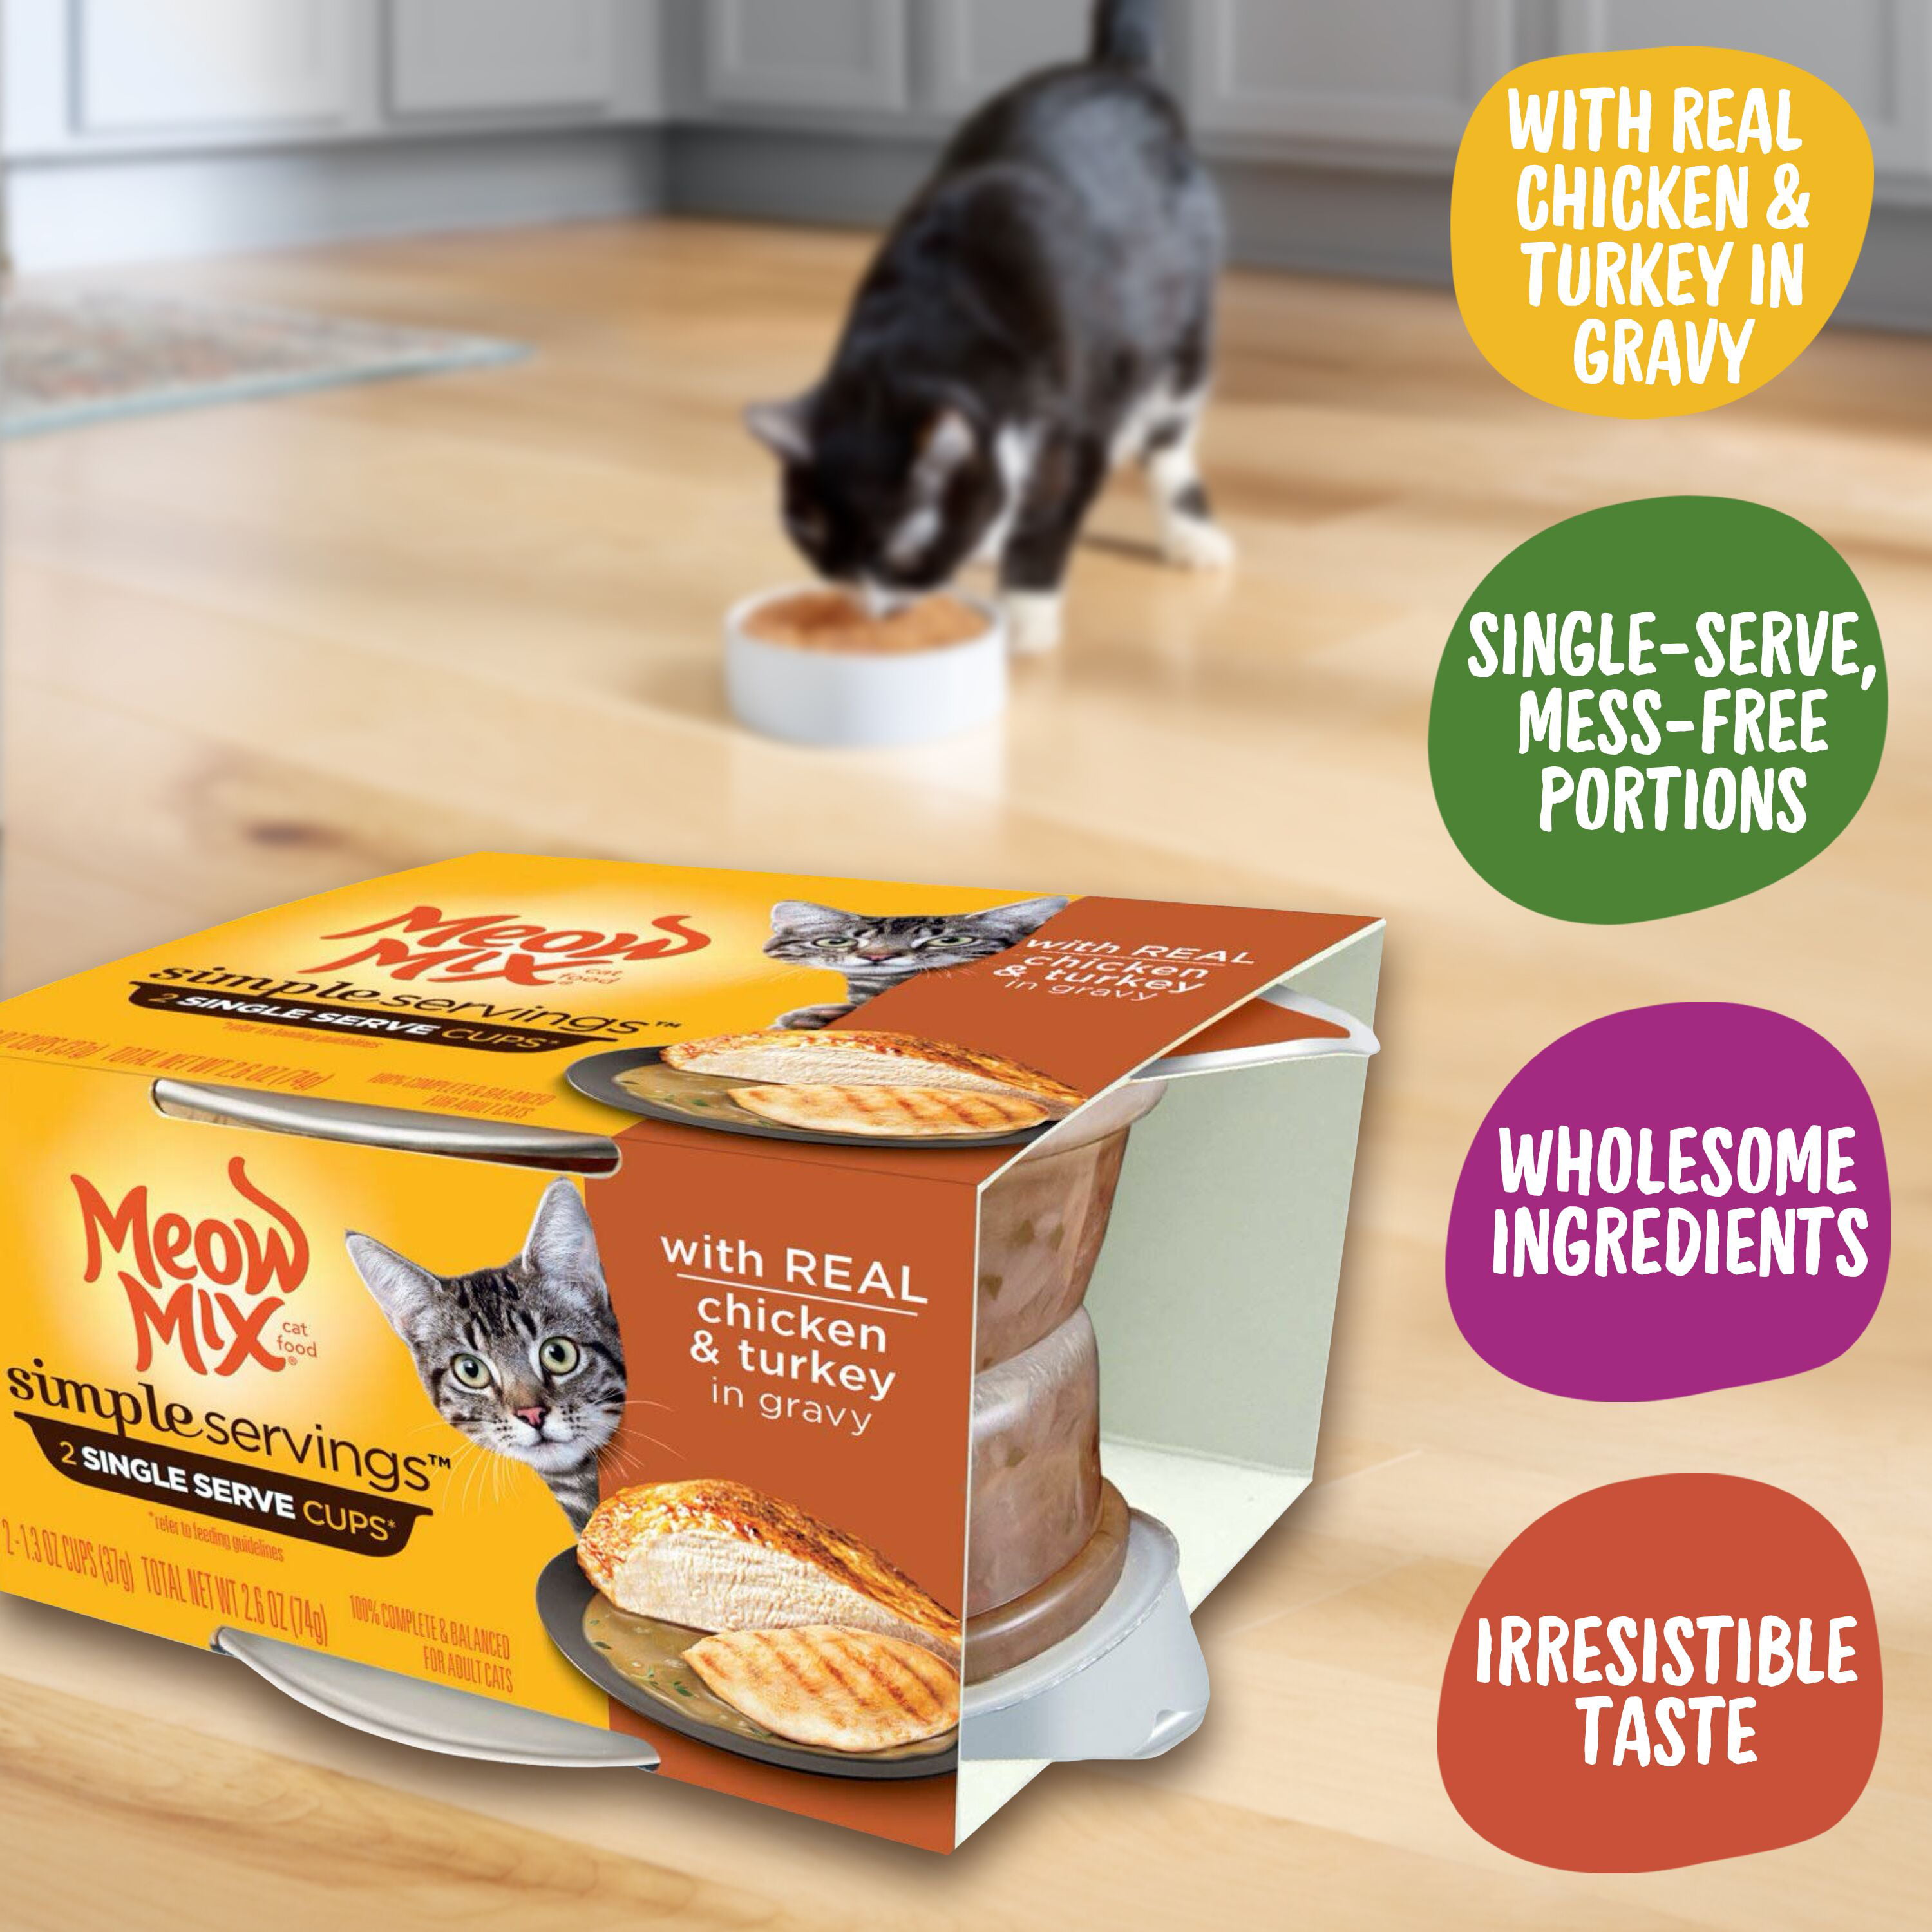 Meow Mix Simple Servings Wet Cat Food with Real Chicken and Turkey in